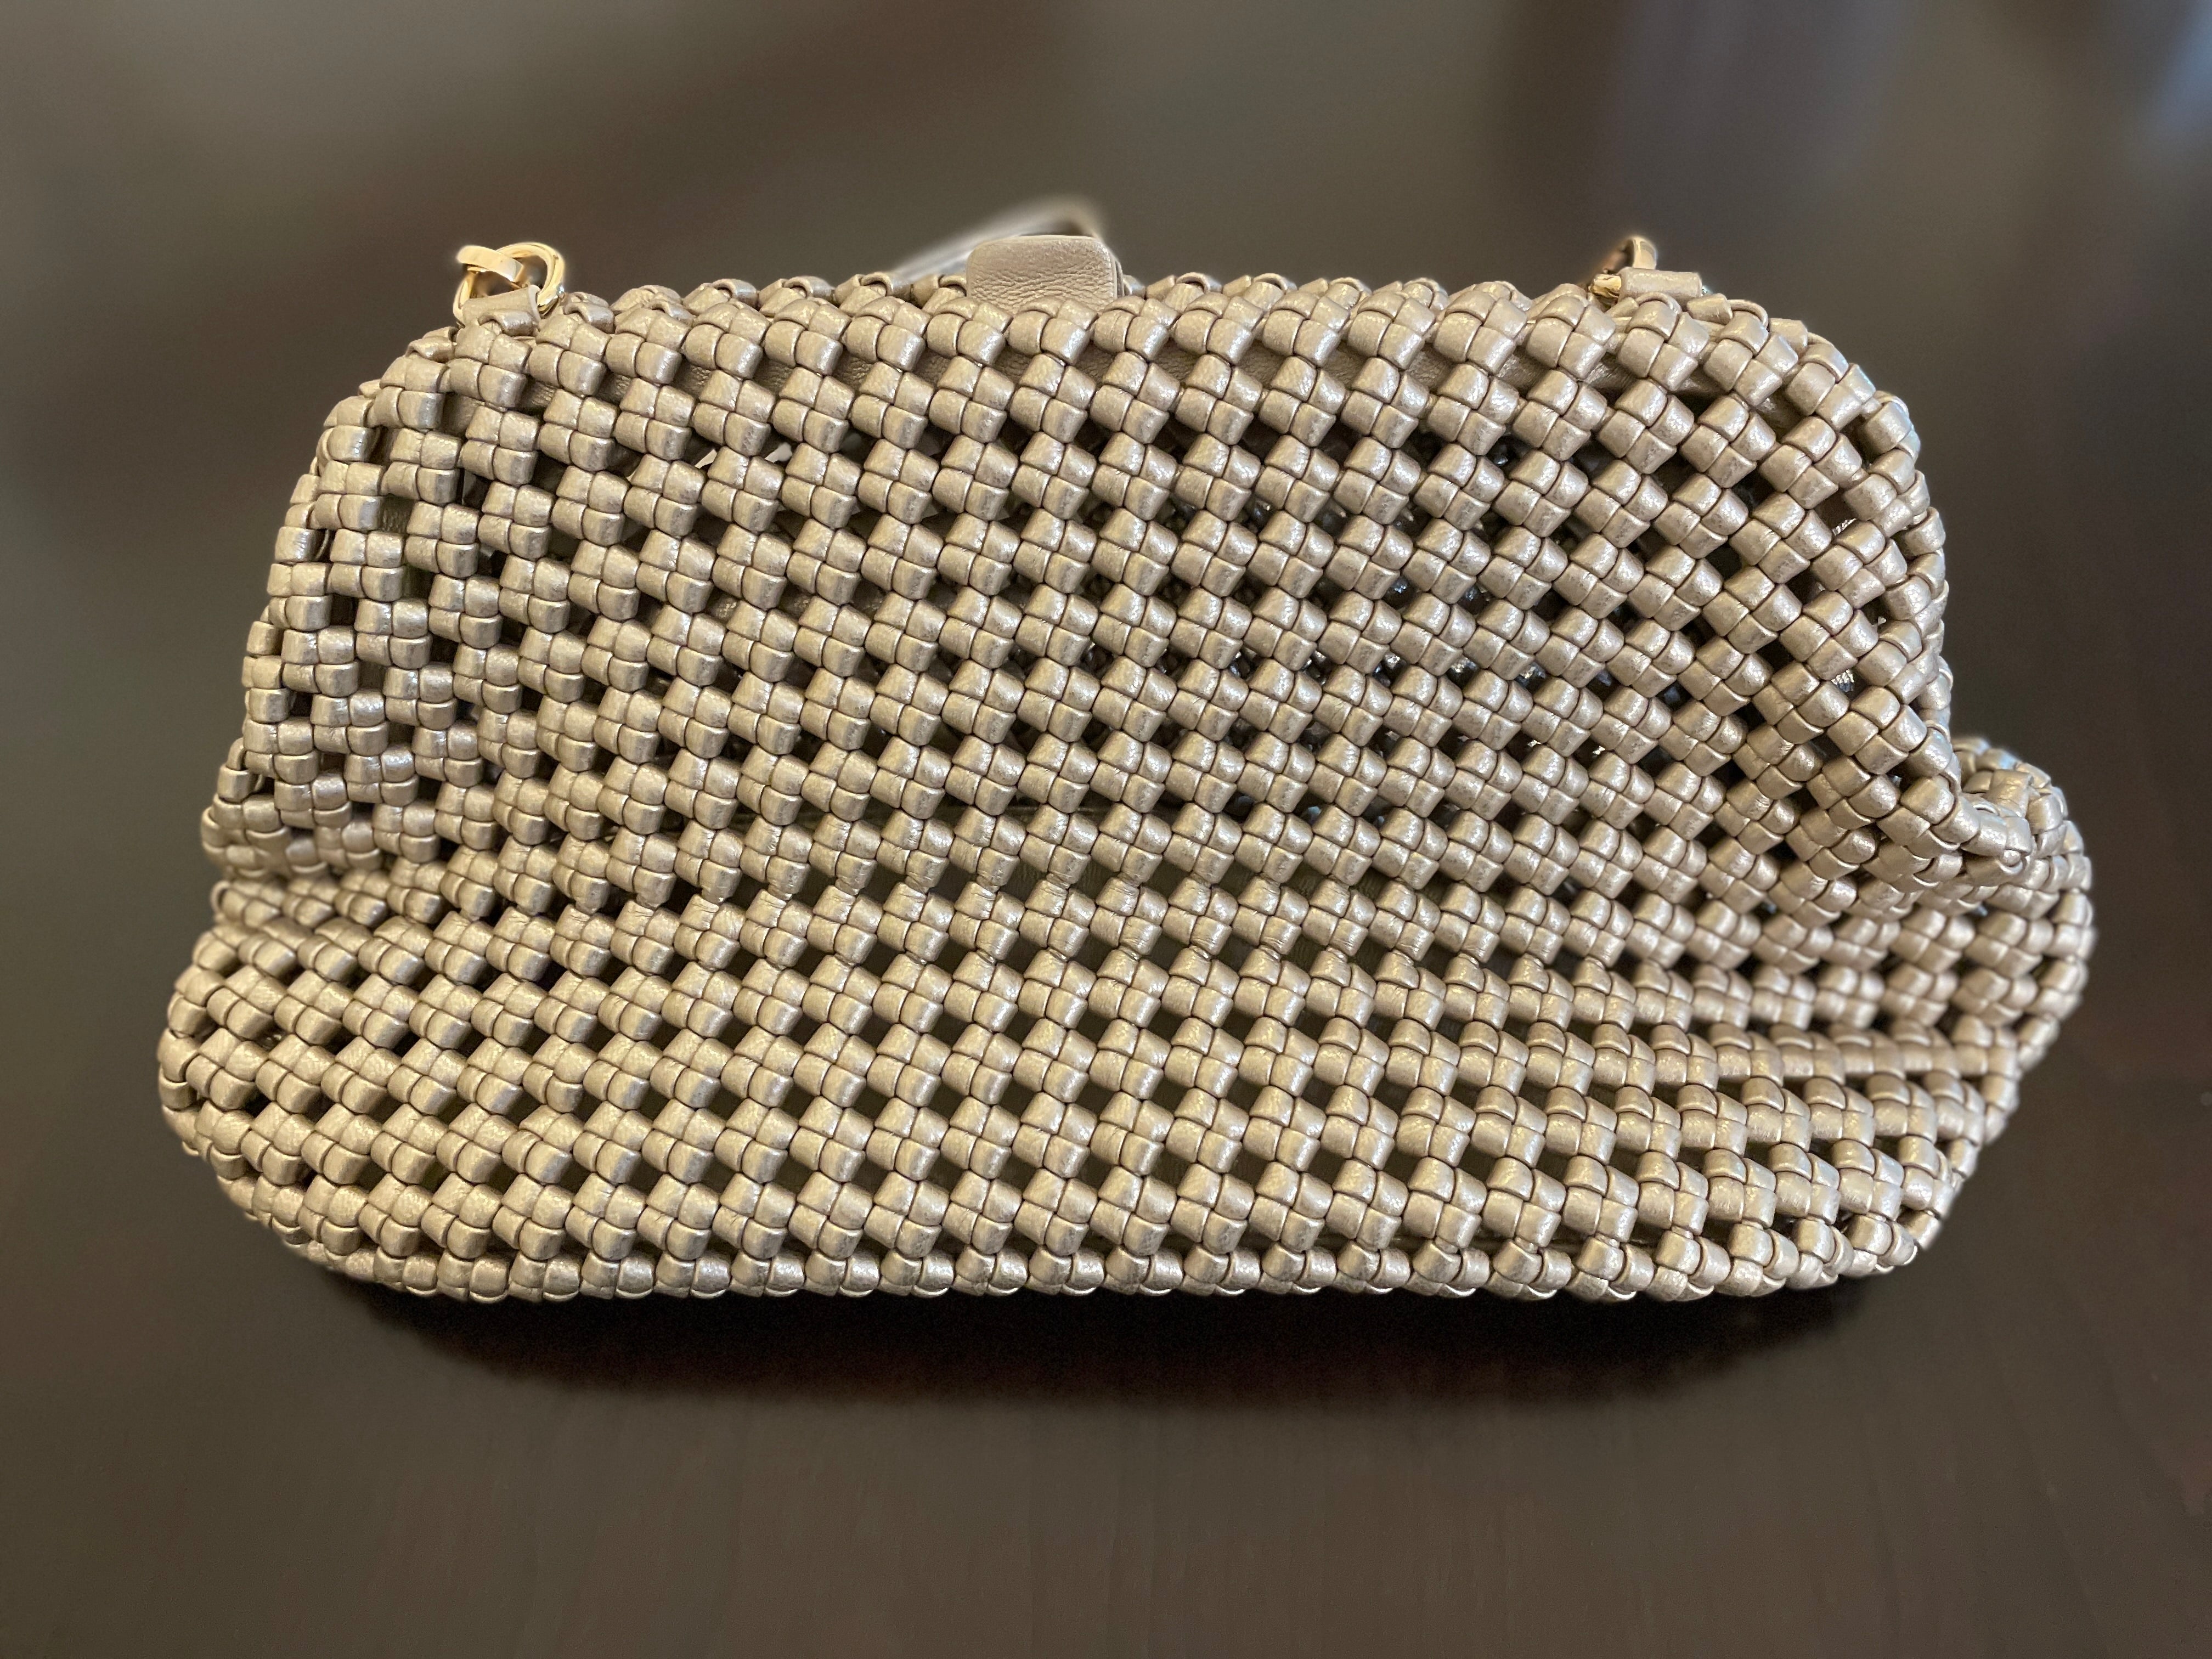 Knotted Clutch Bag